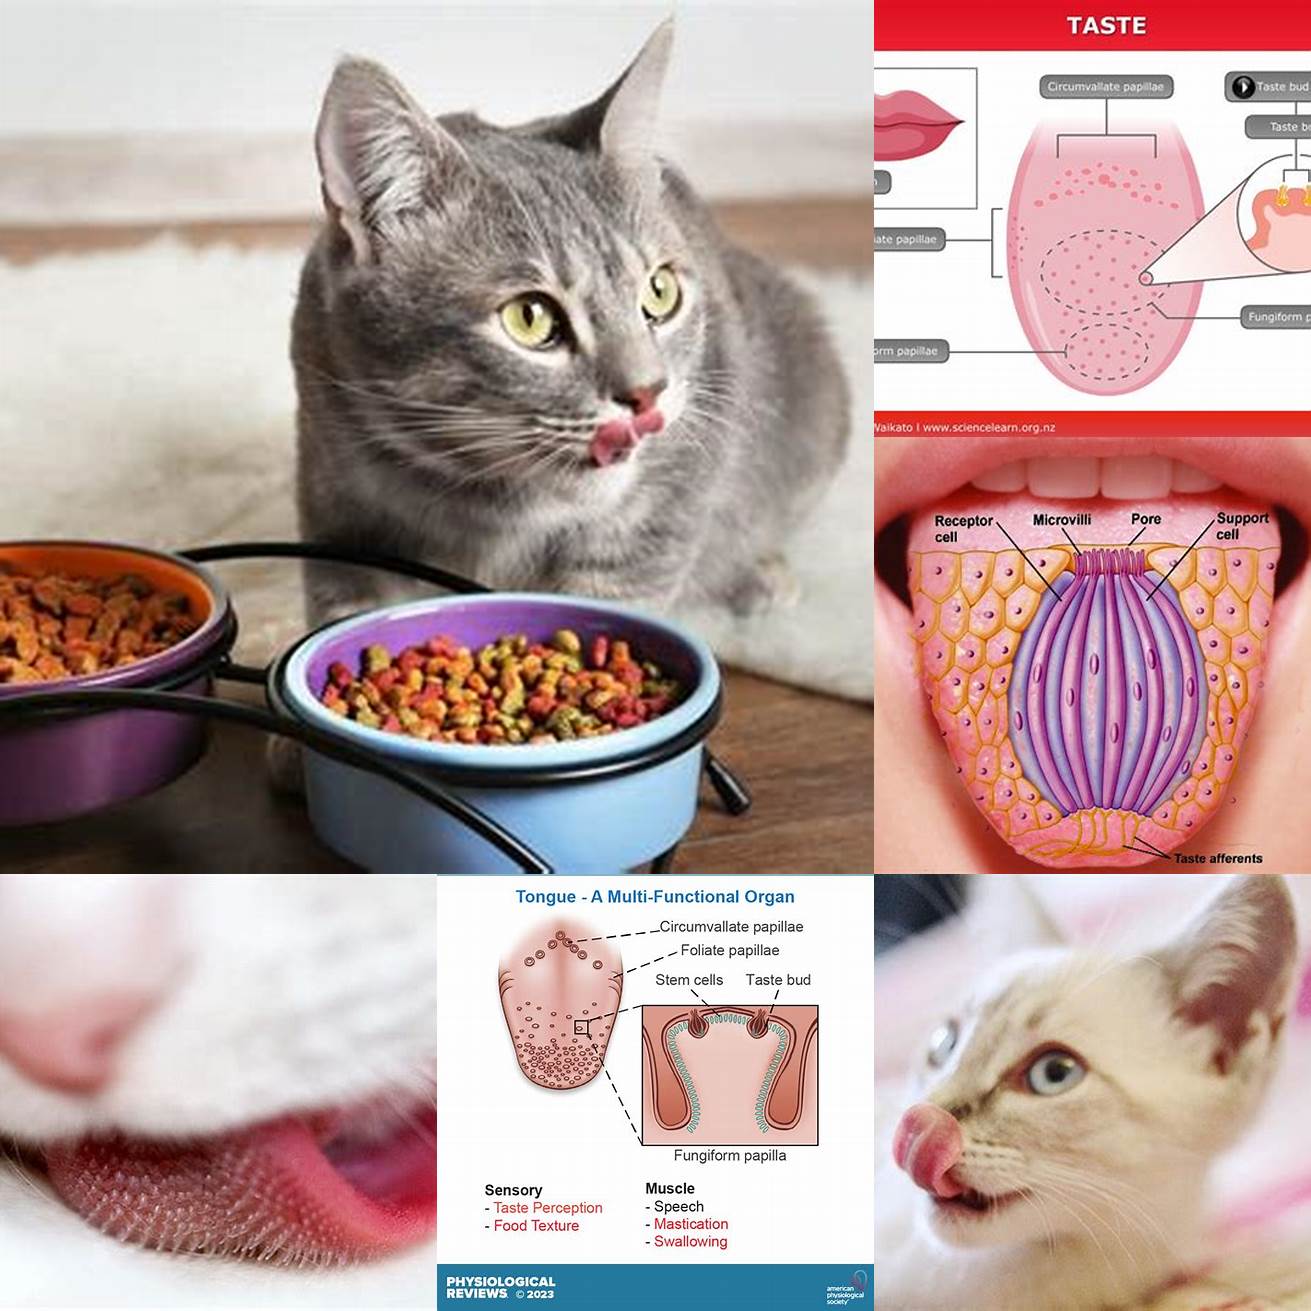 Human and cat taste buds compared